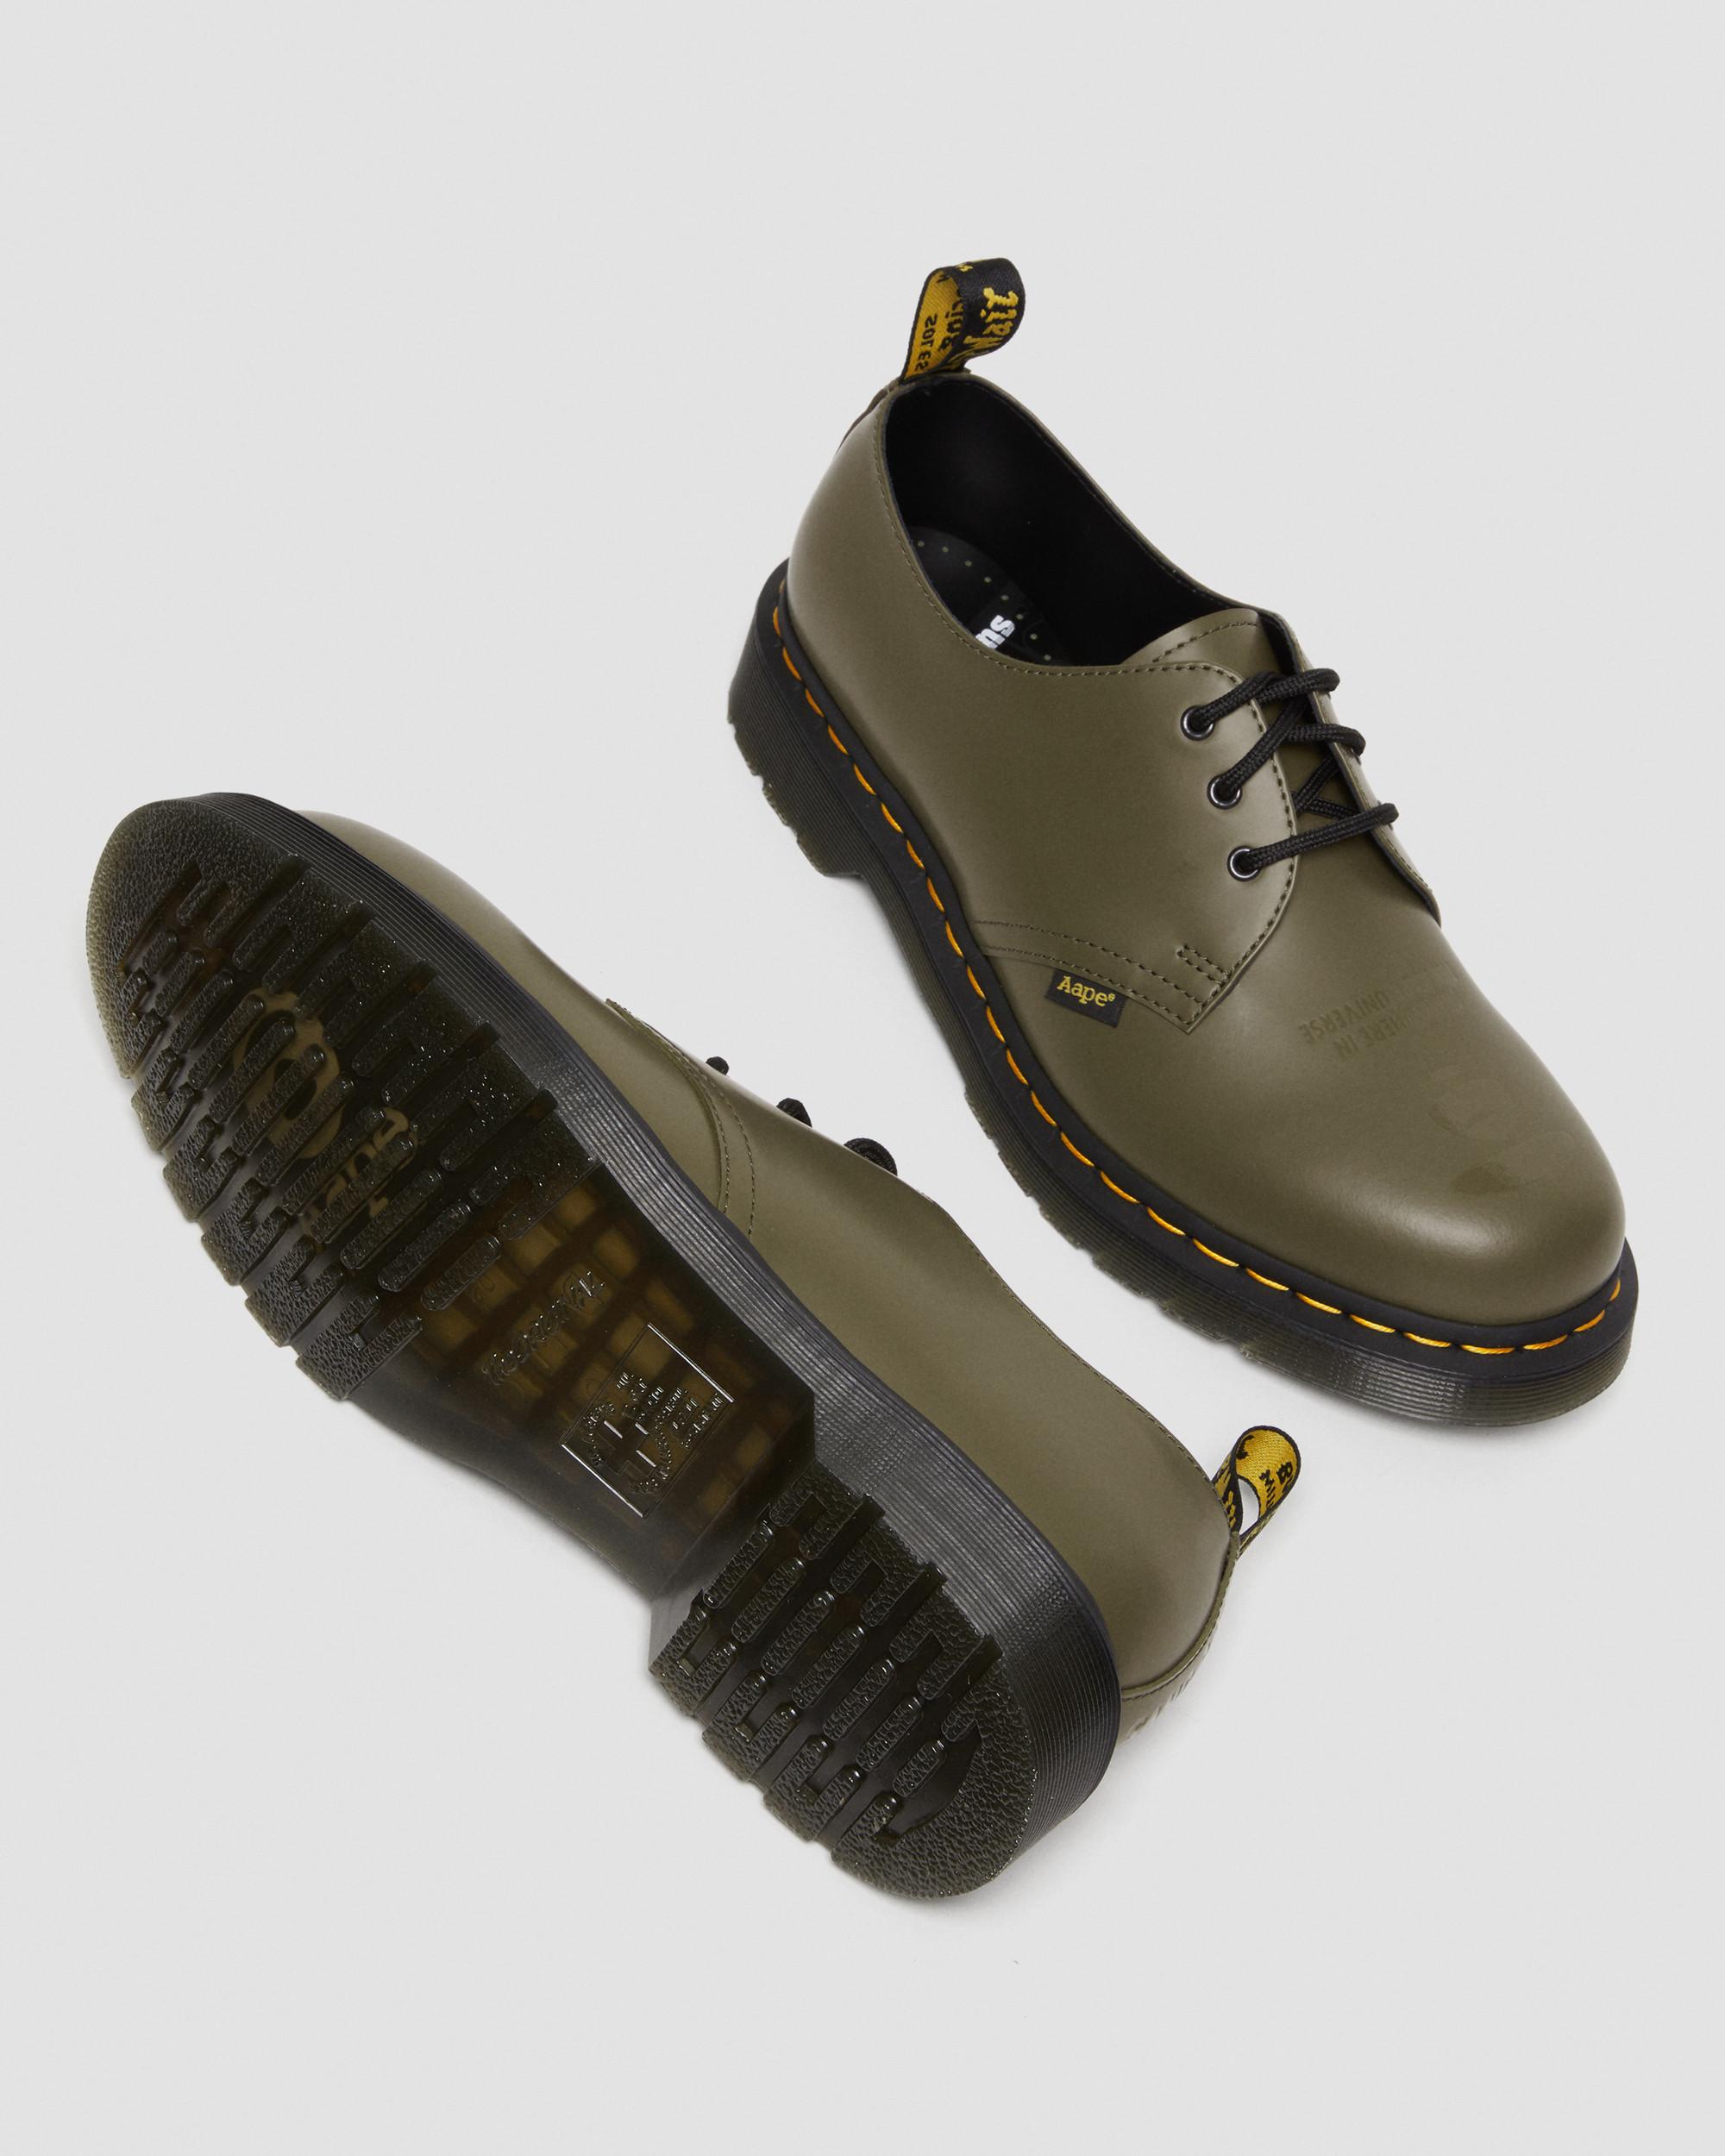 1461 AAPE Smooth Leather Oxford Shoes, Olive Green | Dr. Martens